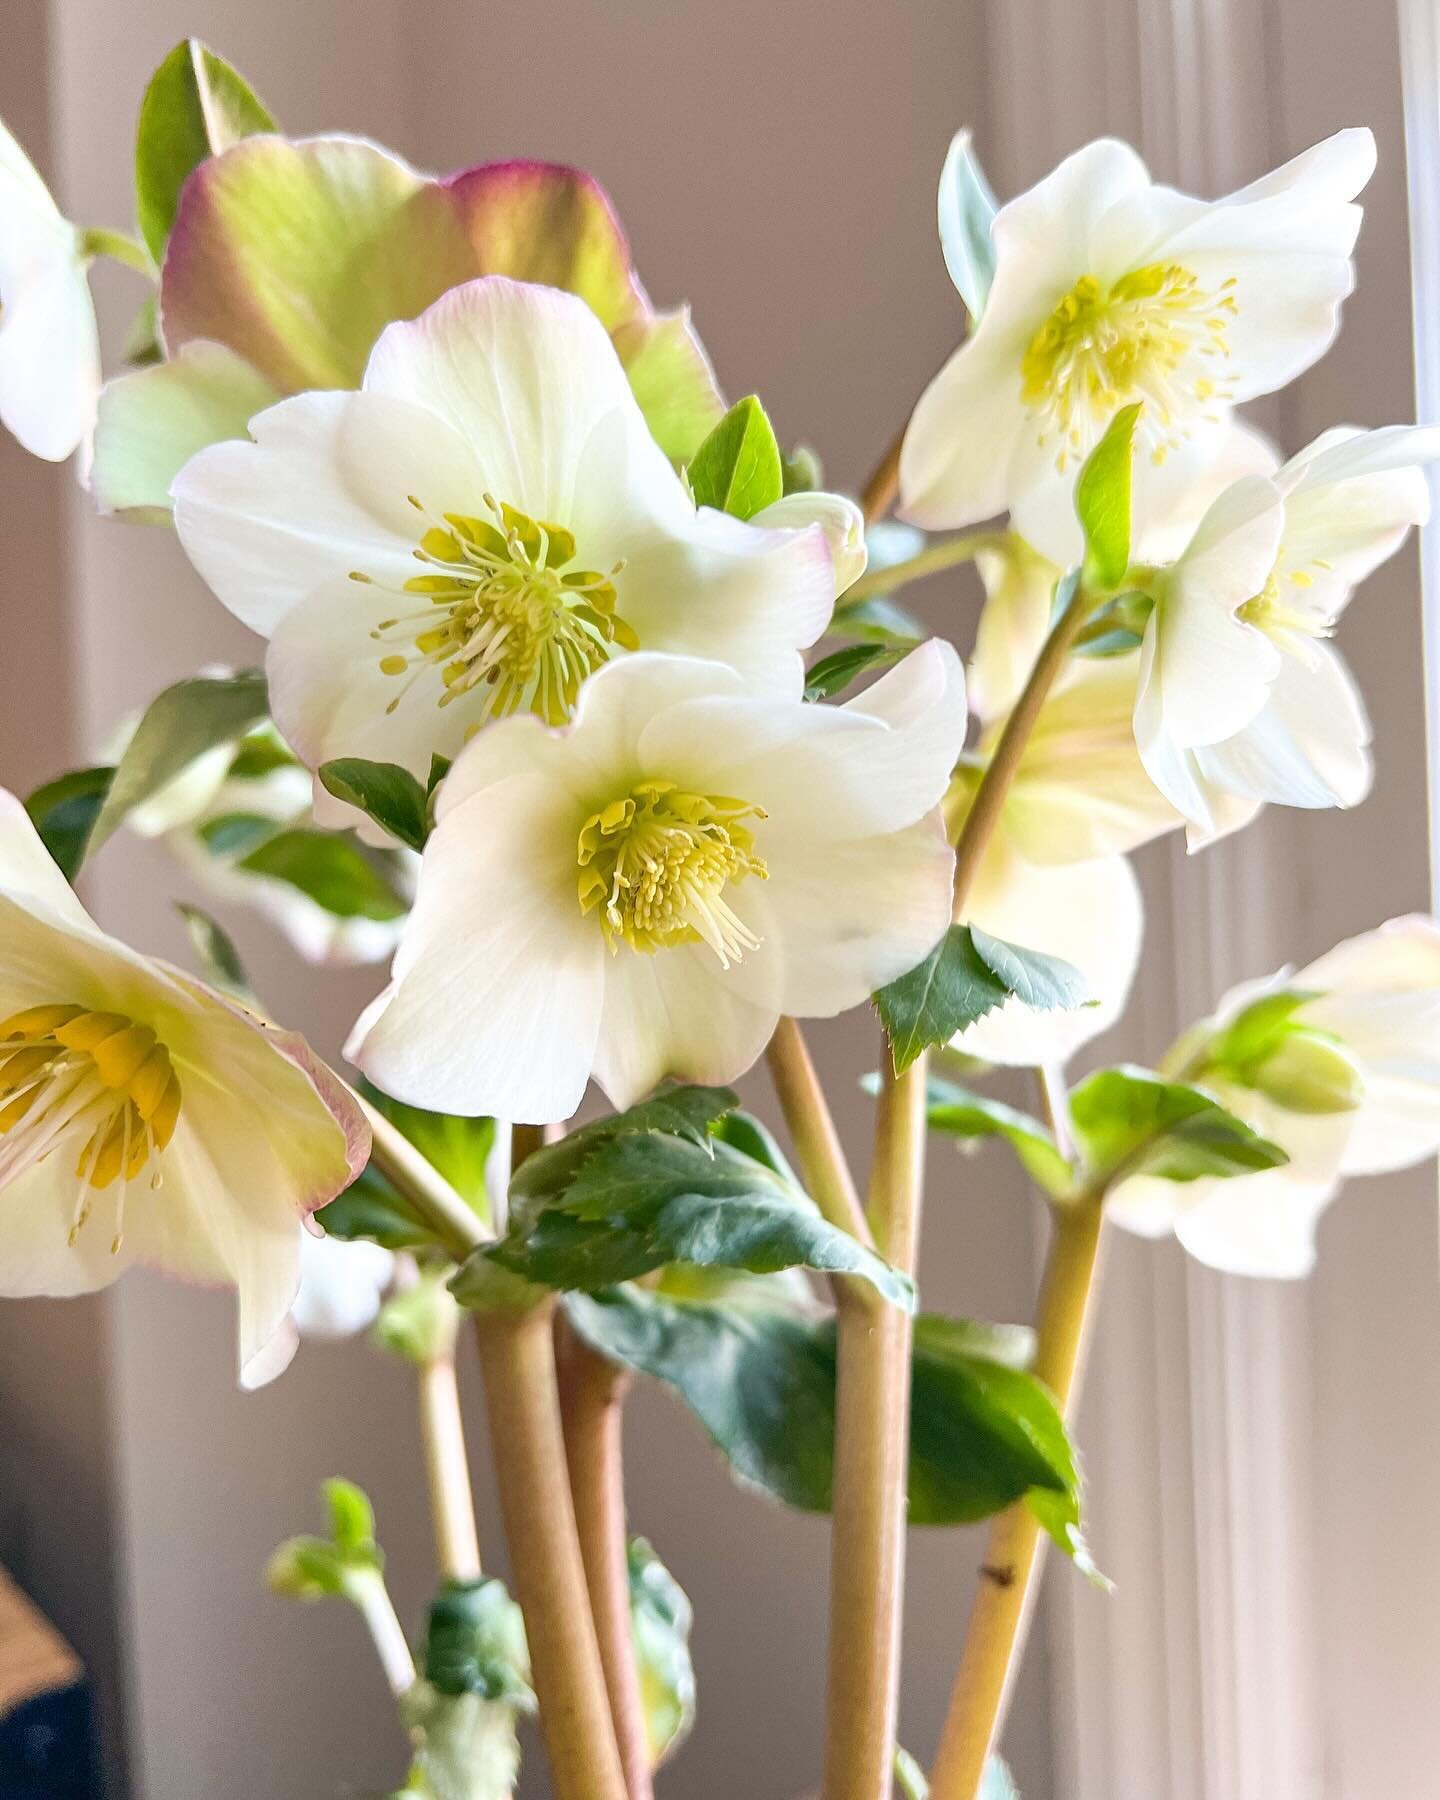 Hello friends!  Well that was a much longer social media break than I planned but I&rsquo;m officially done with holiday installs and have much work to share! 

First up is this trio of hellebore kokedamas inspired by the recent @tmagazine article fe